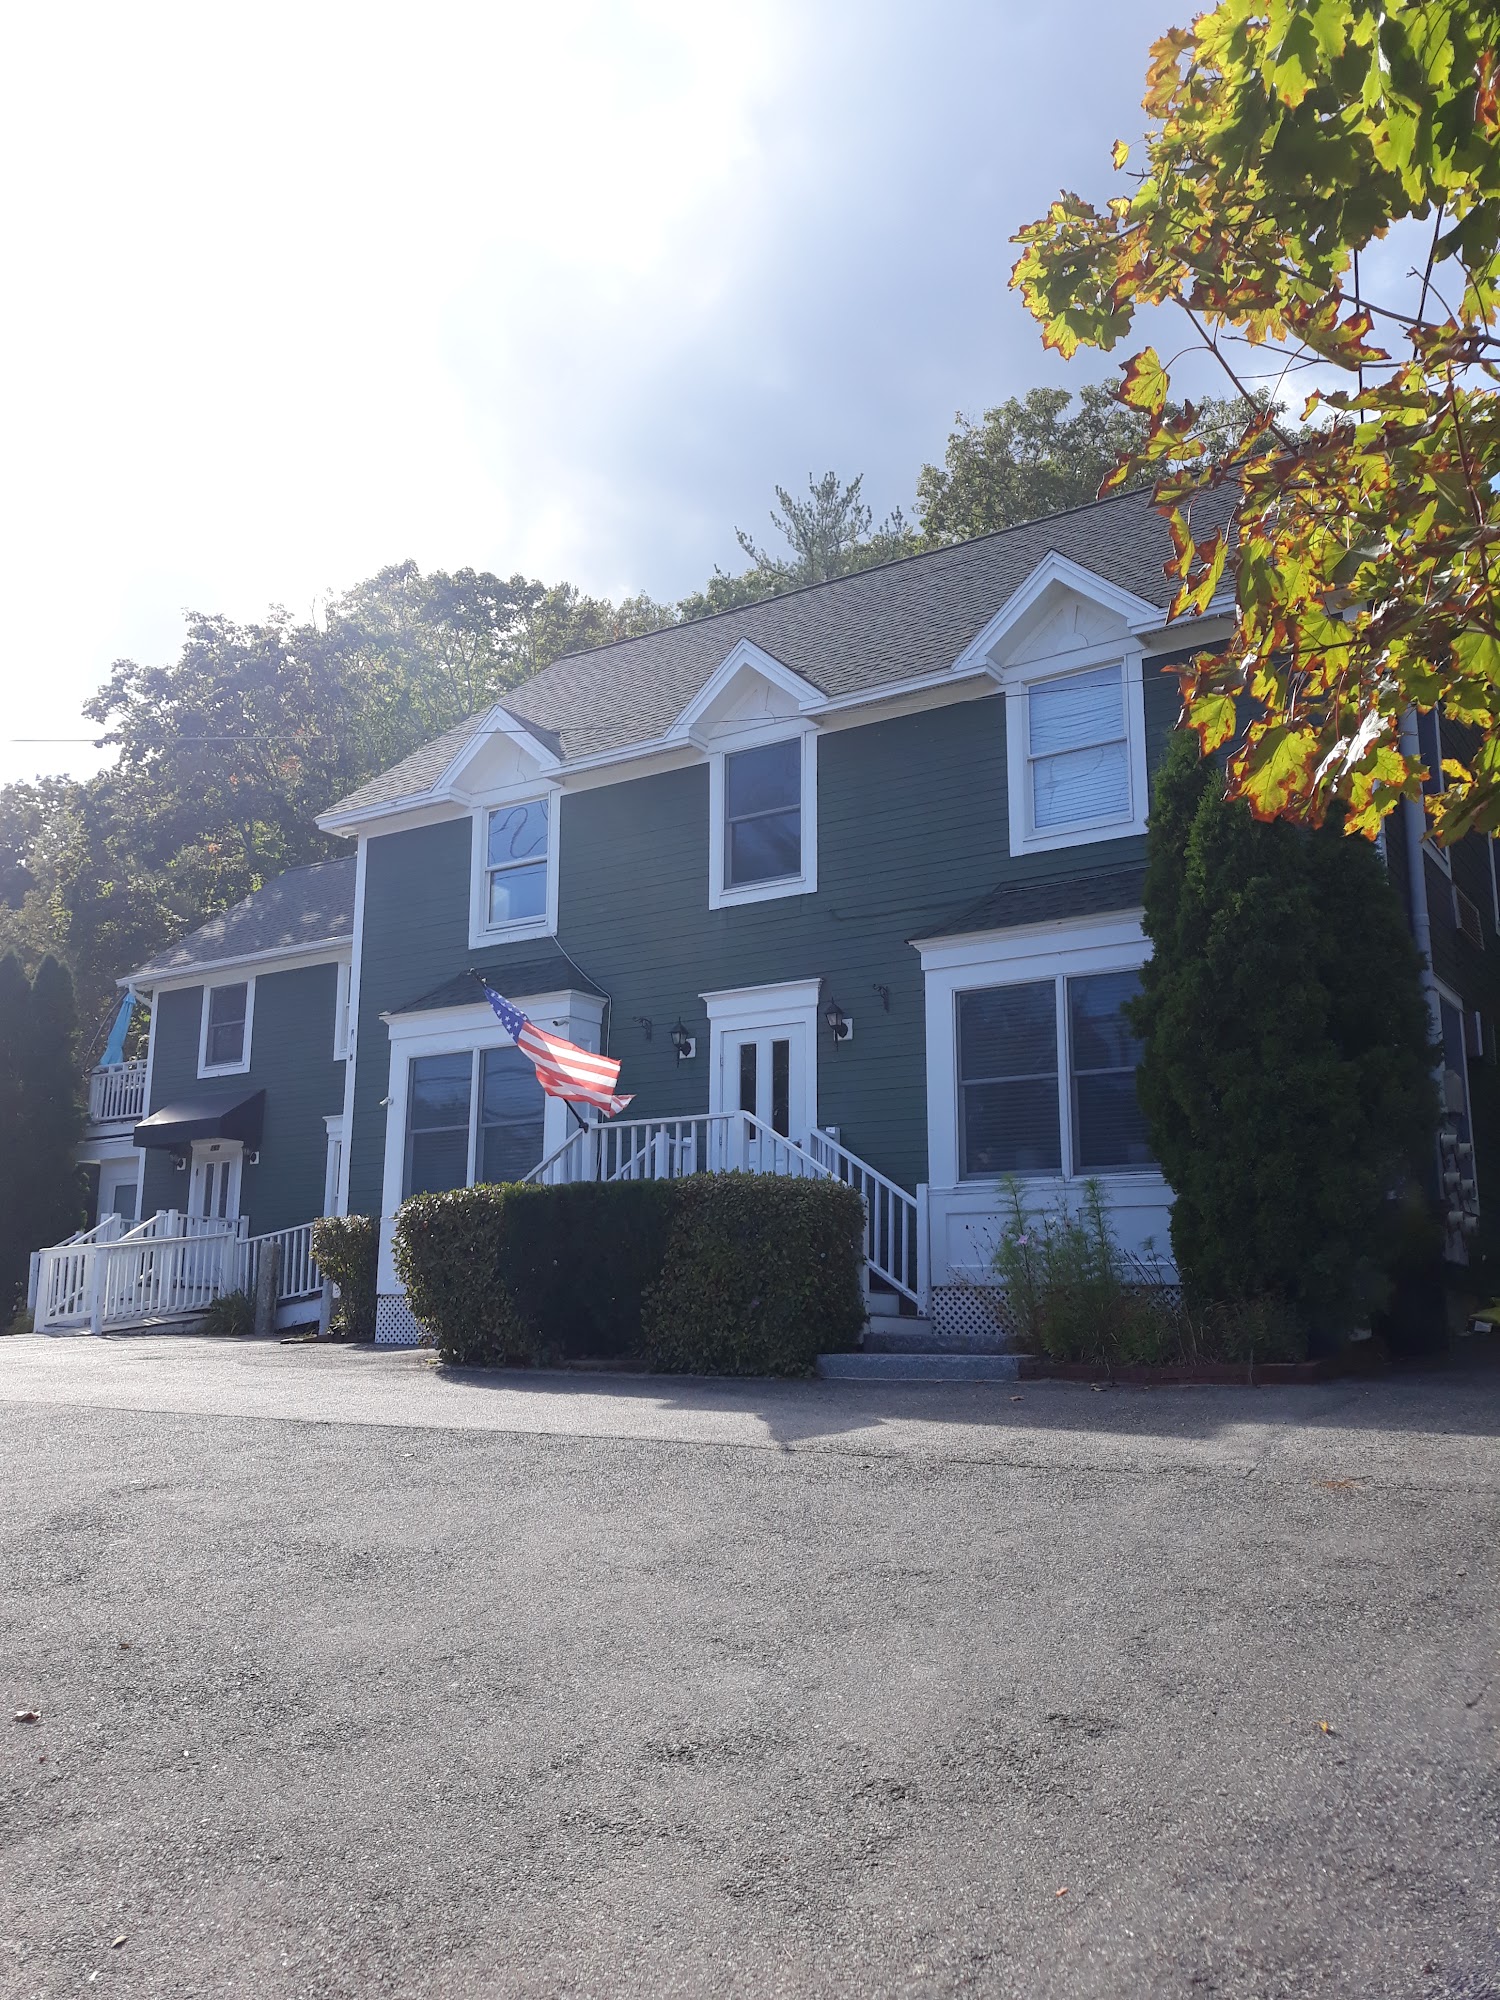 Your Body Works Massage and Day Spa 159 Main St, Ogunquit Maine 03907